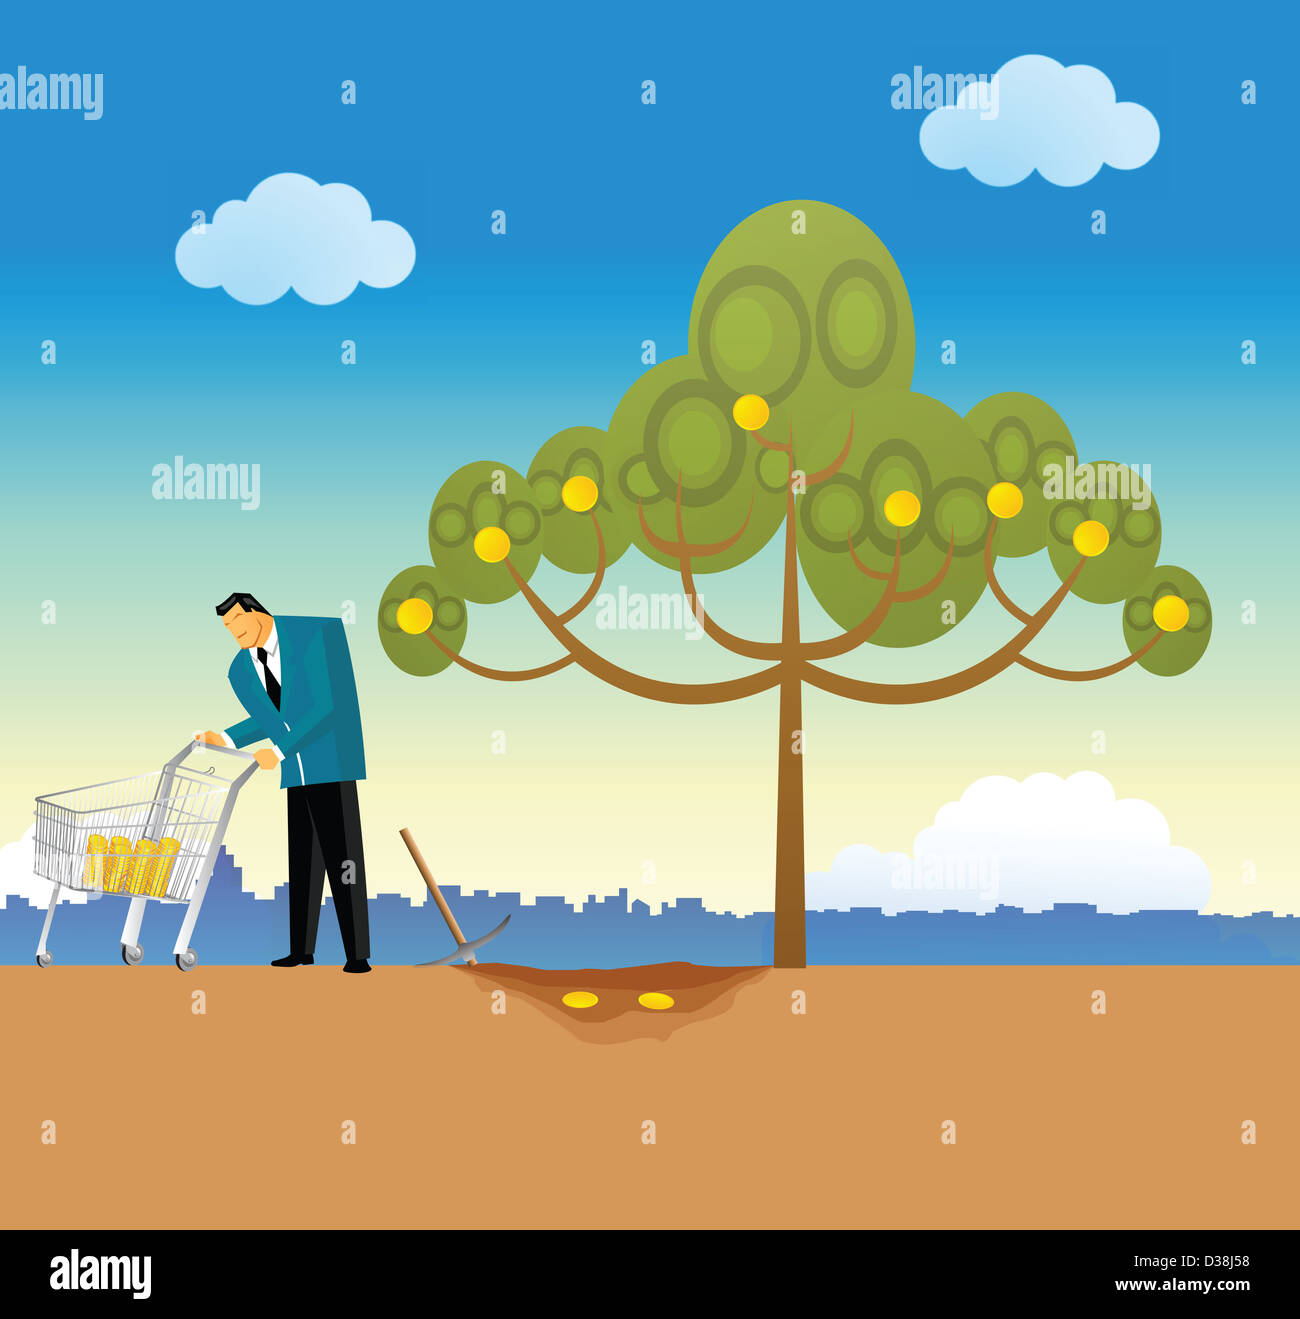 Man pushing coins in a cart collected from a money tree Stock Photo